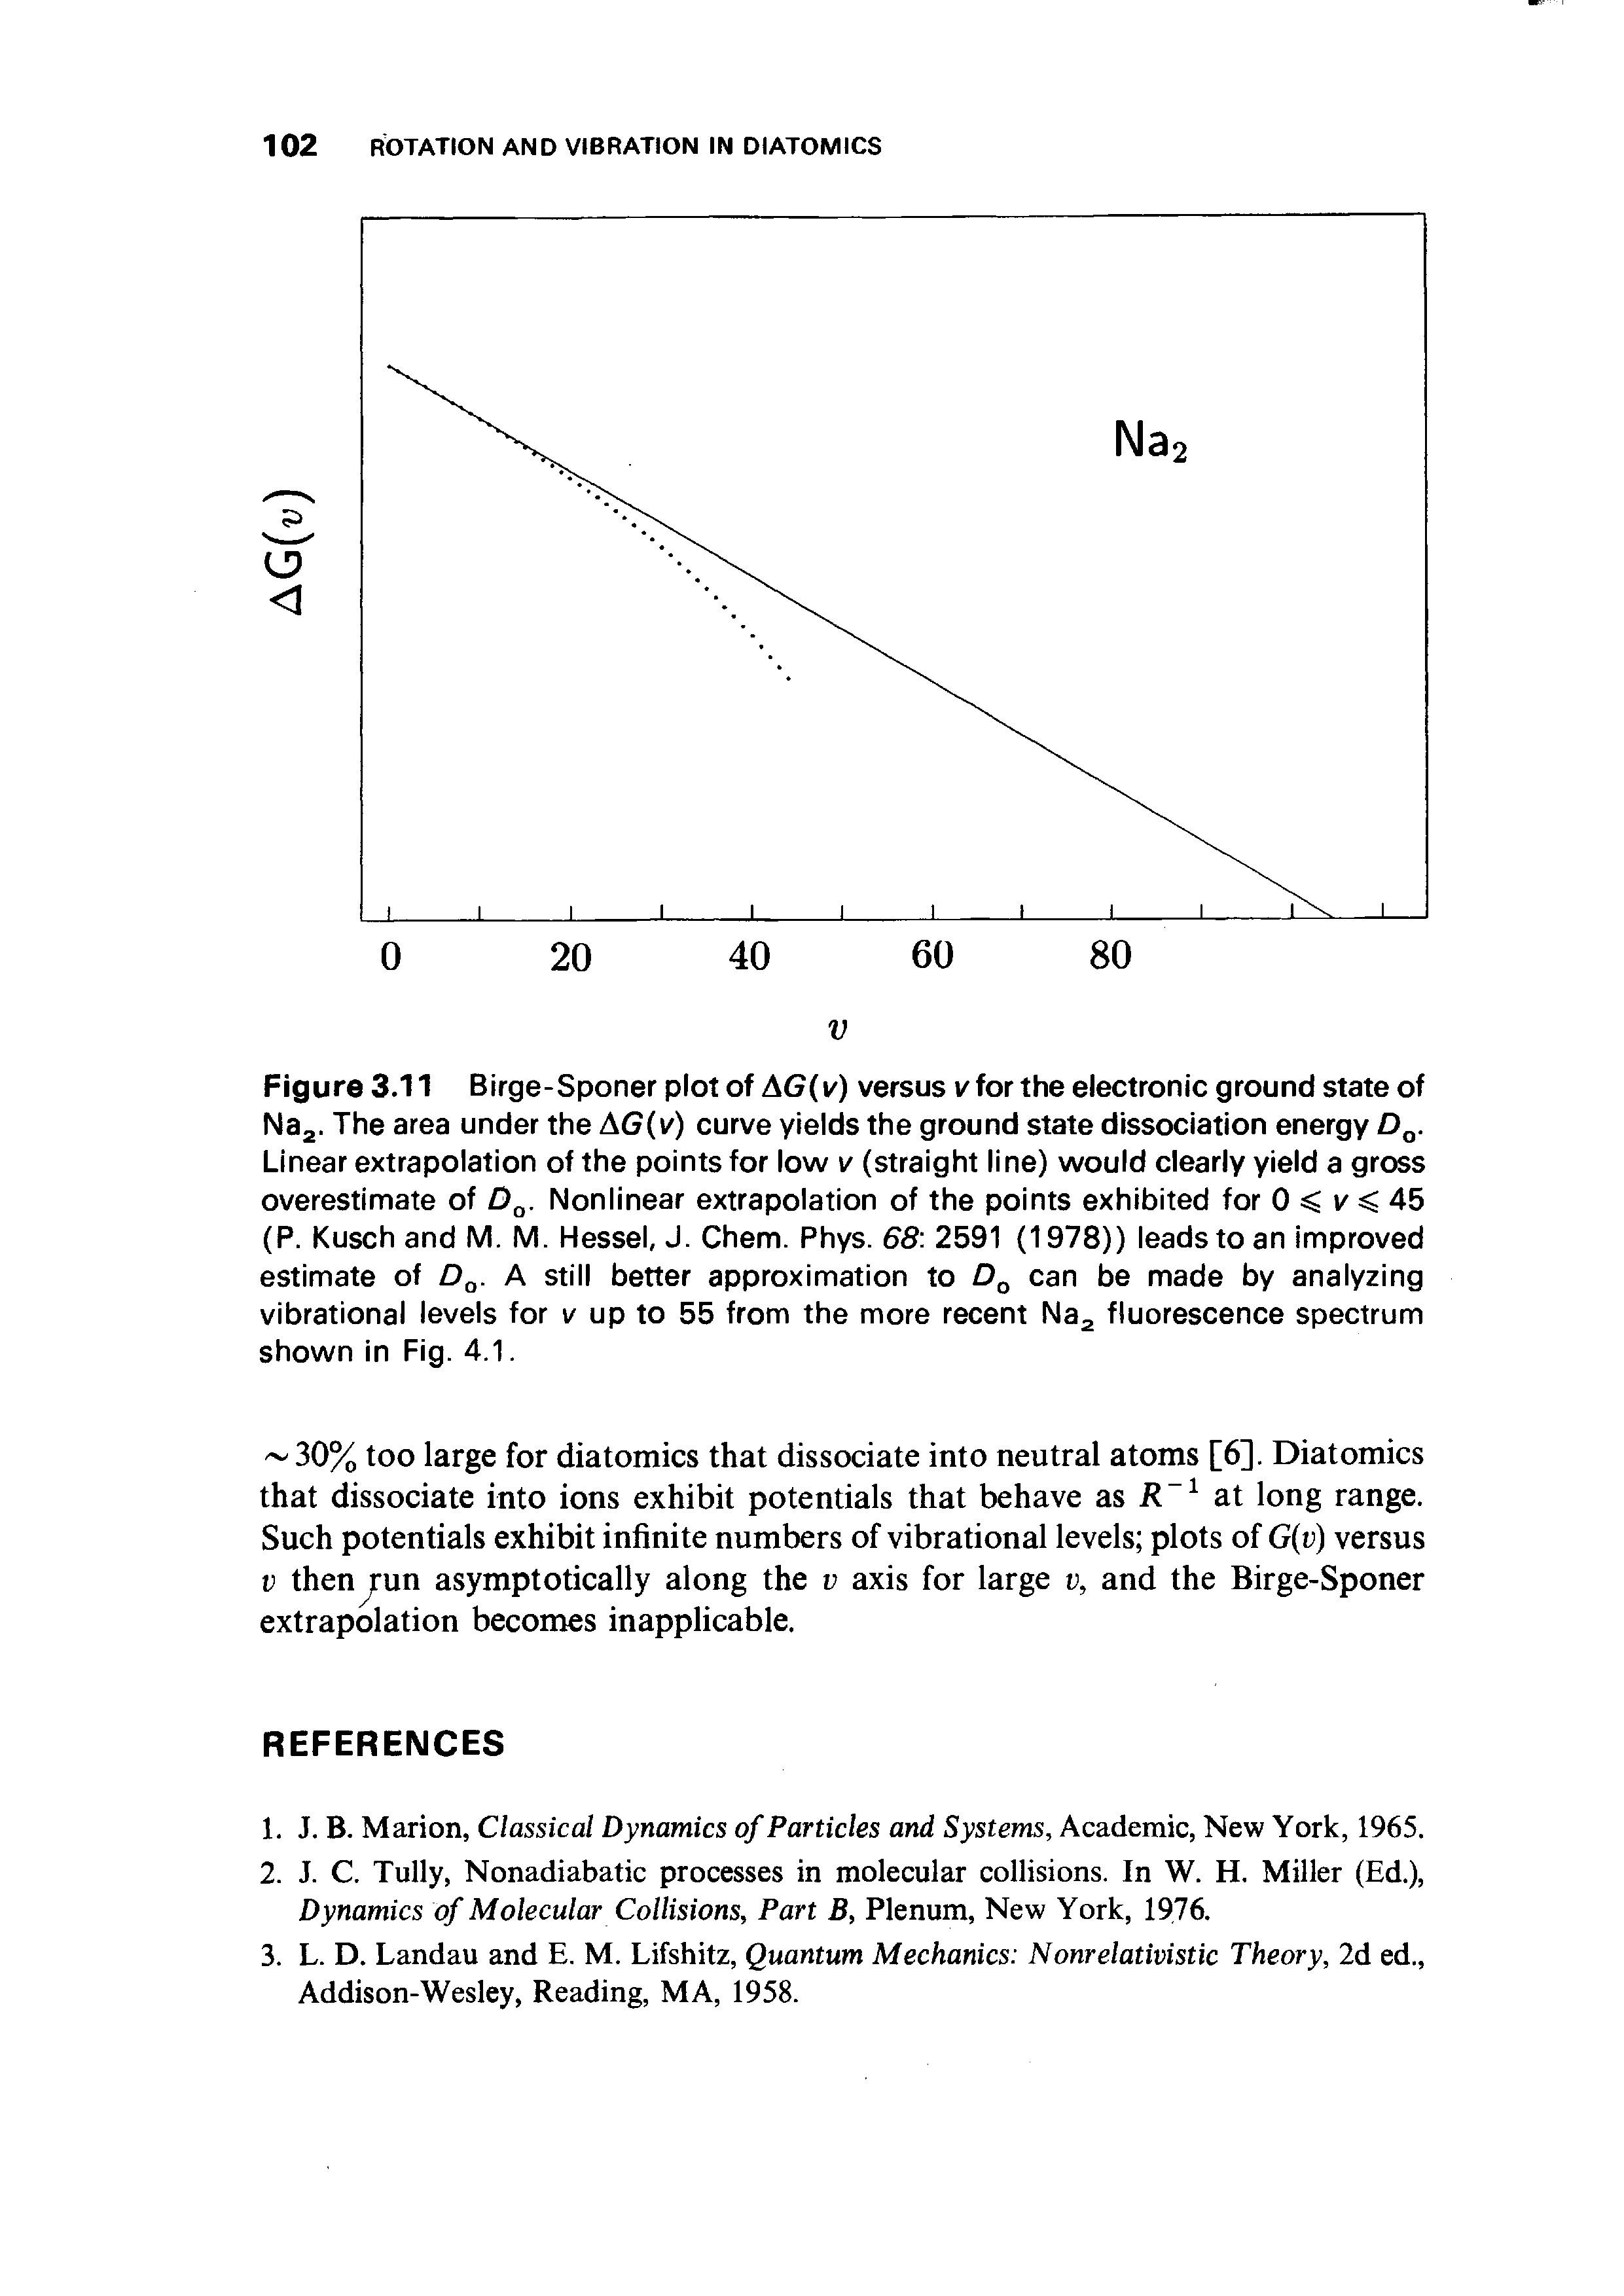 Figure 3.11 Birge-Sponer plot of AG(v) versus v for the electronic ground state of Nag. The area under the AG(v) curve yields the ground state dissociation energy D. Linear extrapolation of the points for low v (straight line) would clearly yield a gross overestimate of Nonlinear extrapolation of the points exhibited for 0 < v < 45 (P. Kusch and M. M. Hessel, J. Chem. Phys. 68 2591 (1978)) leads to an improved estimate of D. A still better approximation to can be made by analyzing vibrational levels for v up to 55 from the more recent Na2 fluorescence spectrum shown in Fig. 4.1.